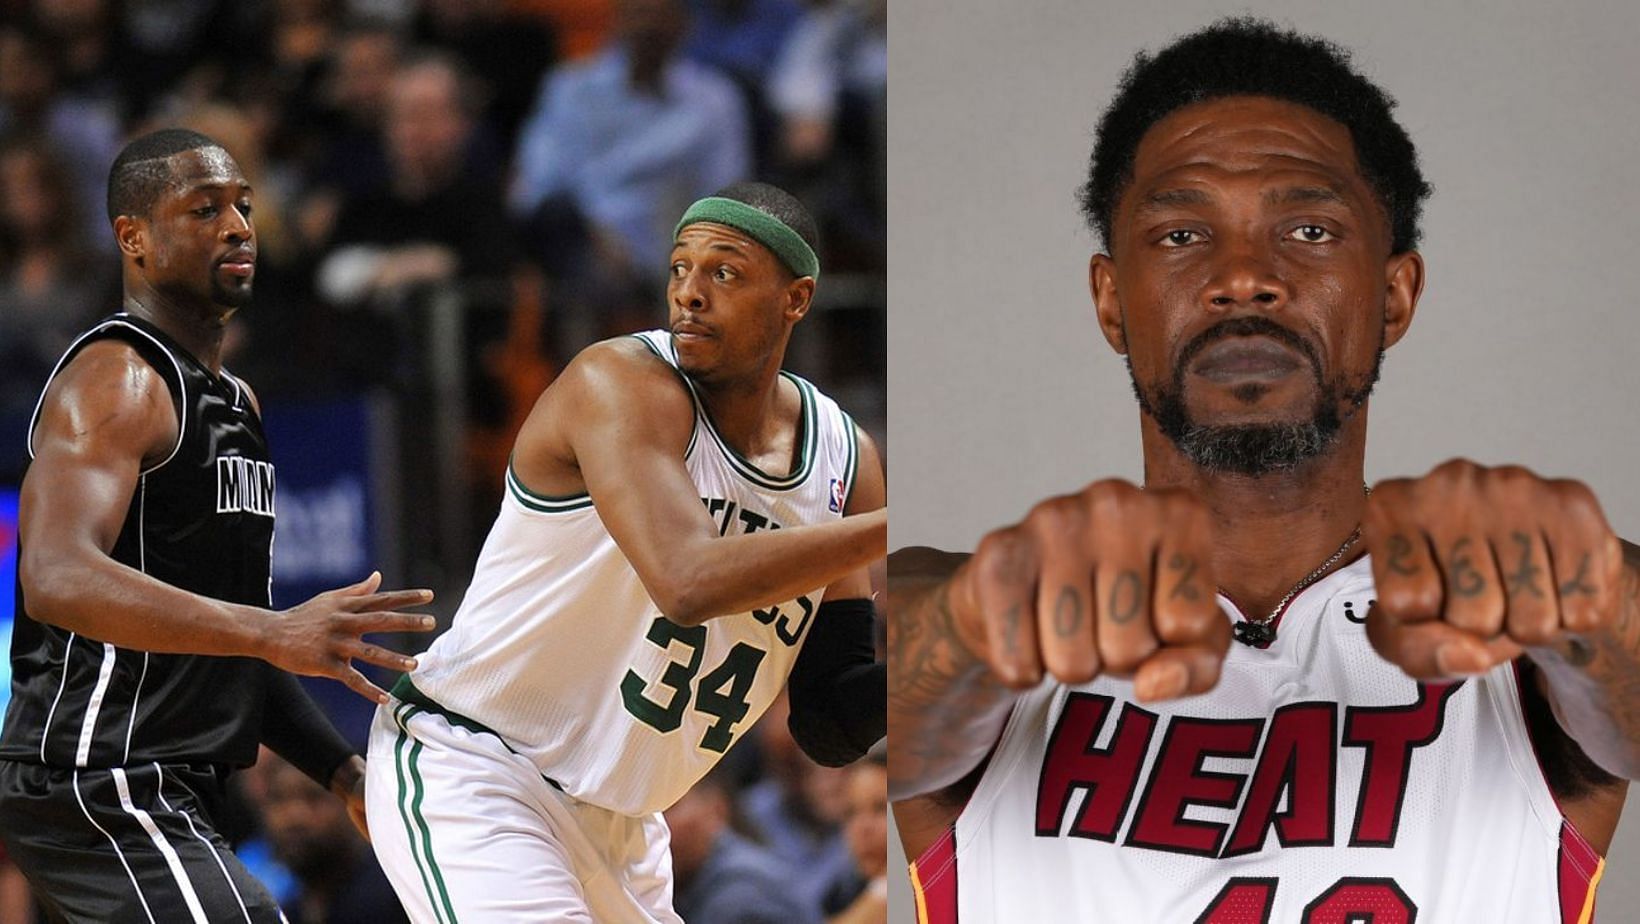 Udonis Haslem blasted Paul Pierce on Instagram after the Boston Celtics legend said he was better than Dwyane Wade.